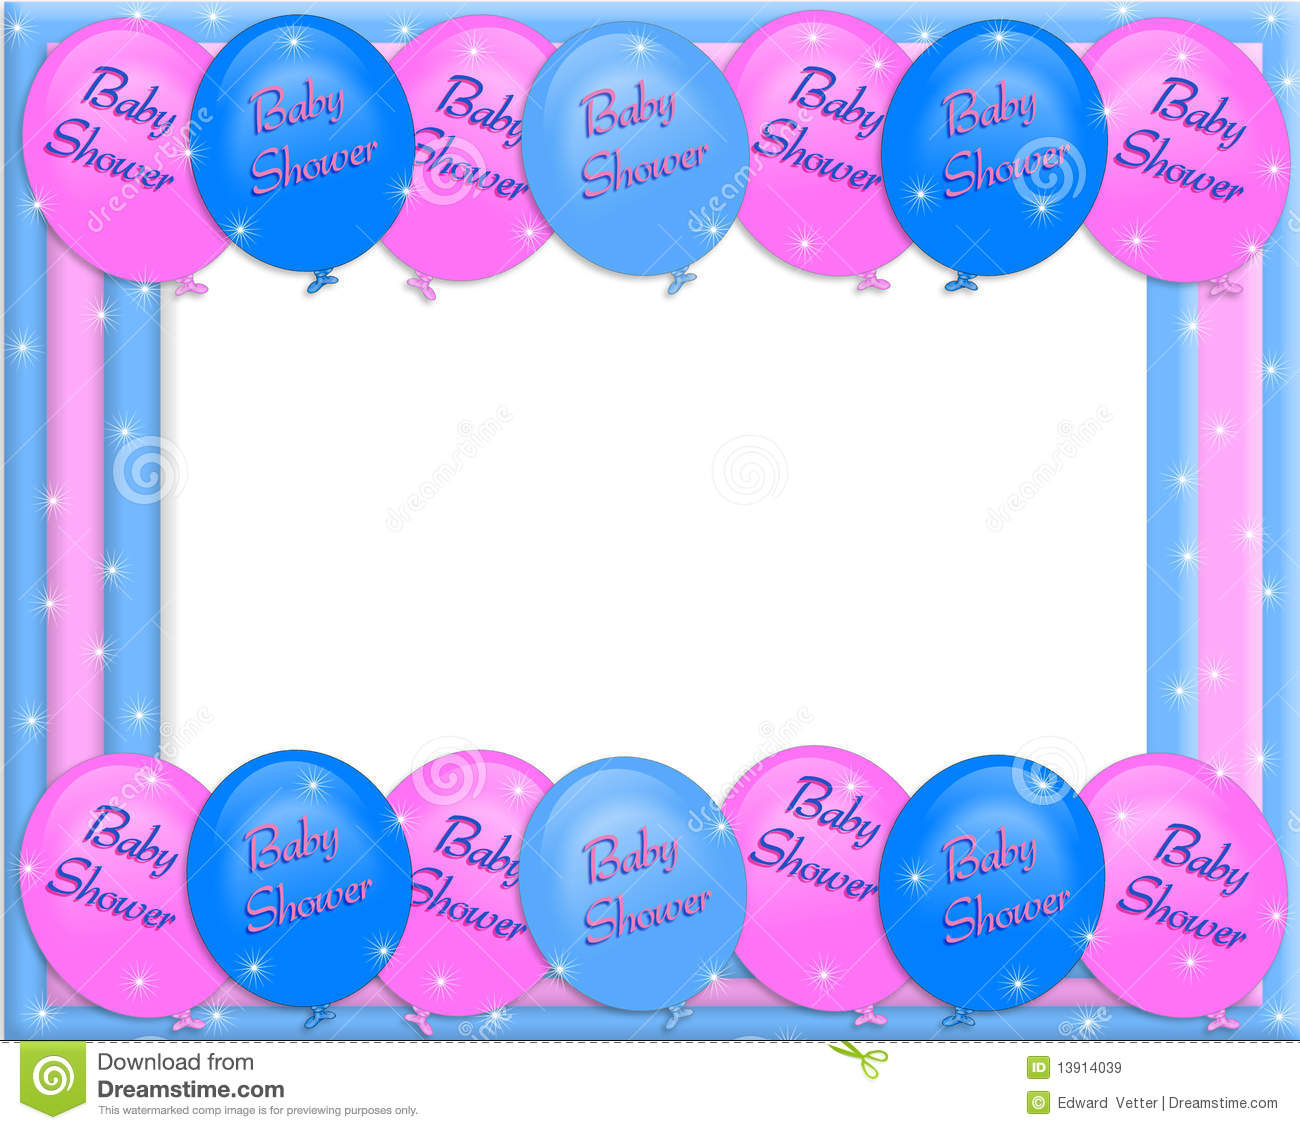 Free Clip Art Borders For Baby Showers Baby Shower Invitation Border